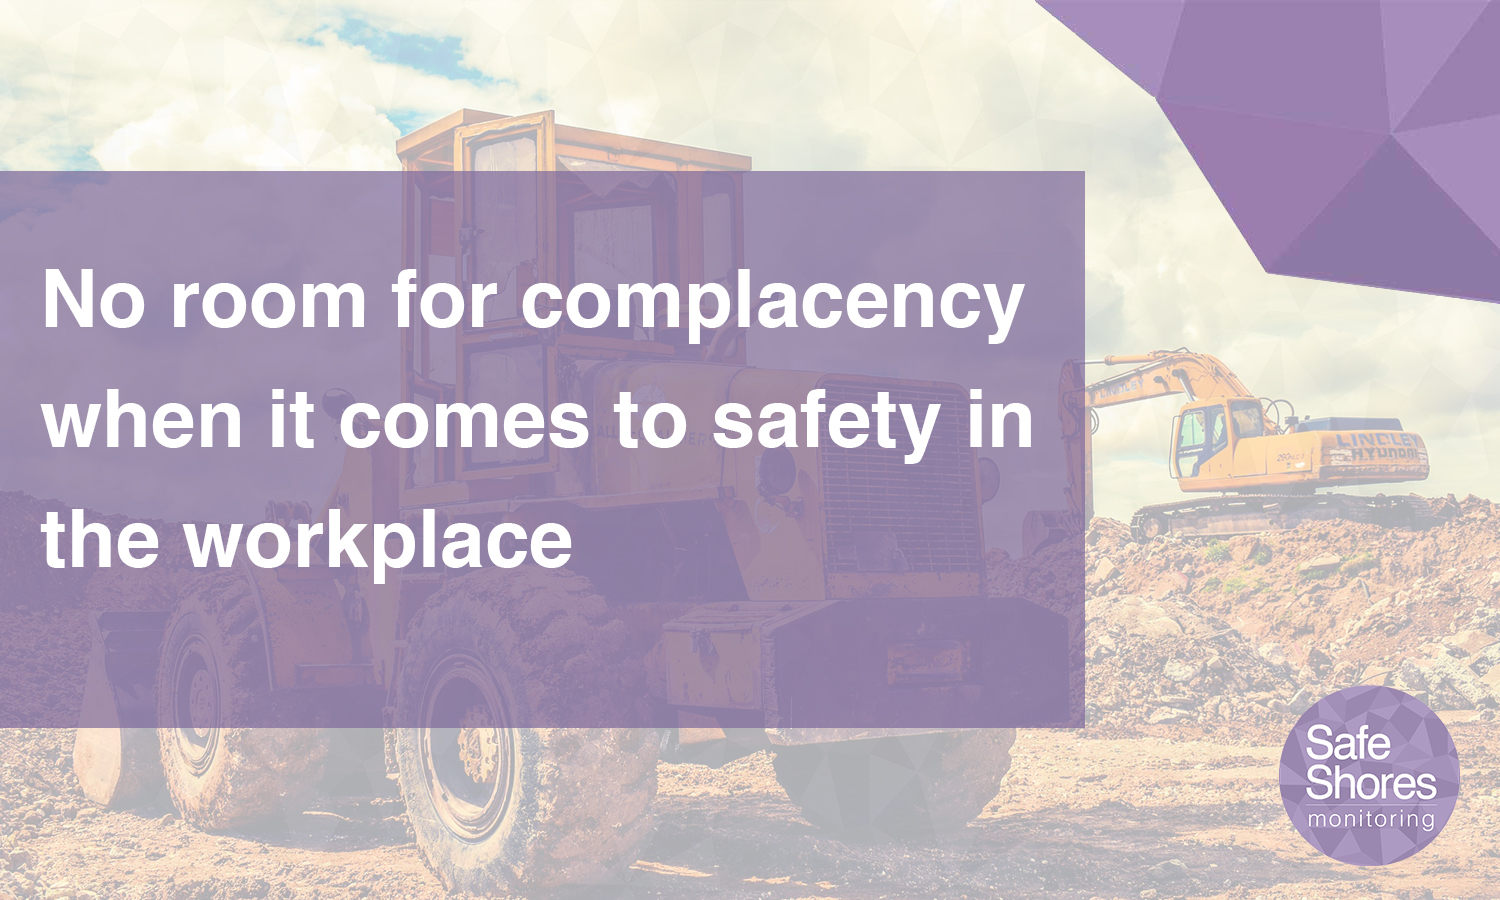 No room for complacency when it comes to workplace safety